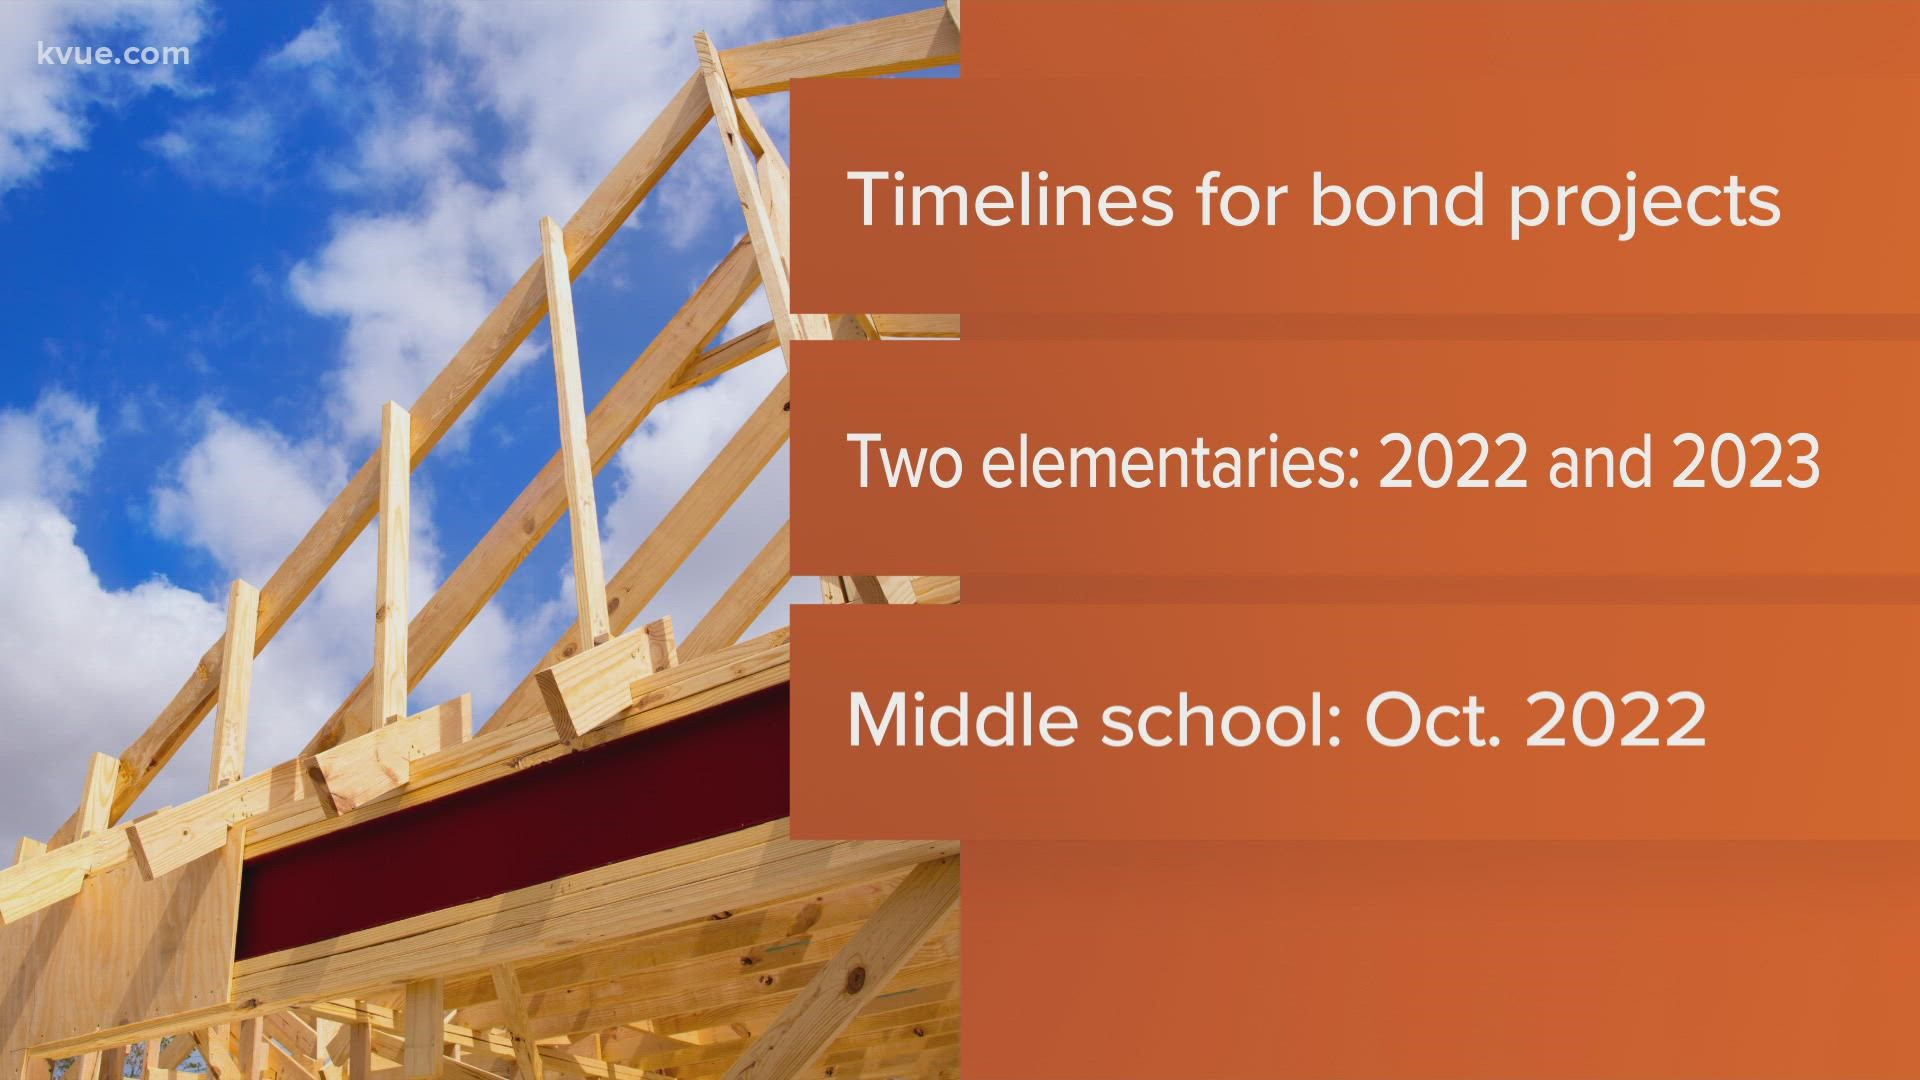 georgetown-isd-presents-tentative-timelines-for-major-construction-projects-kvue